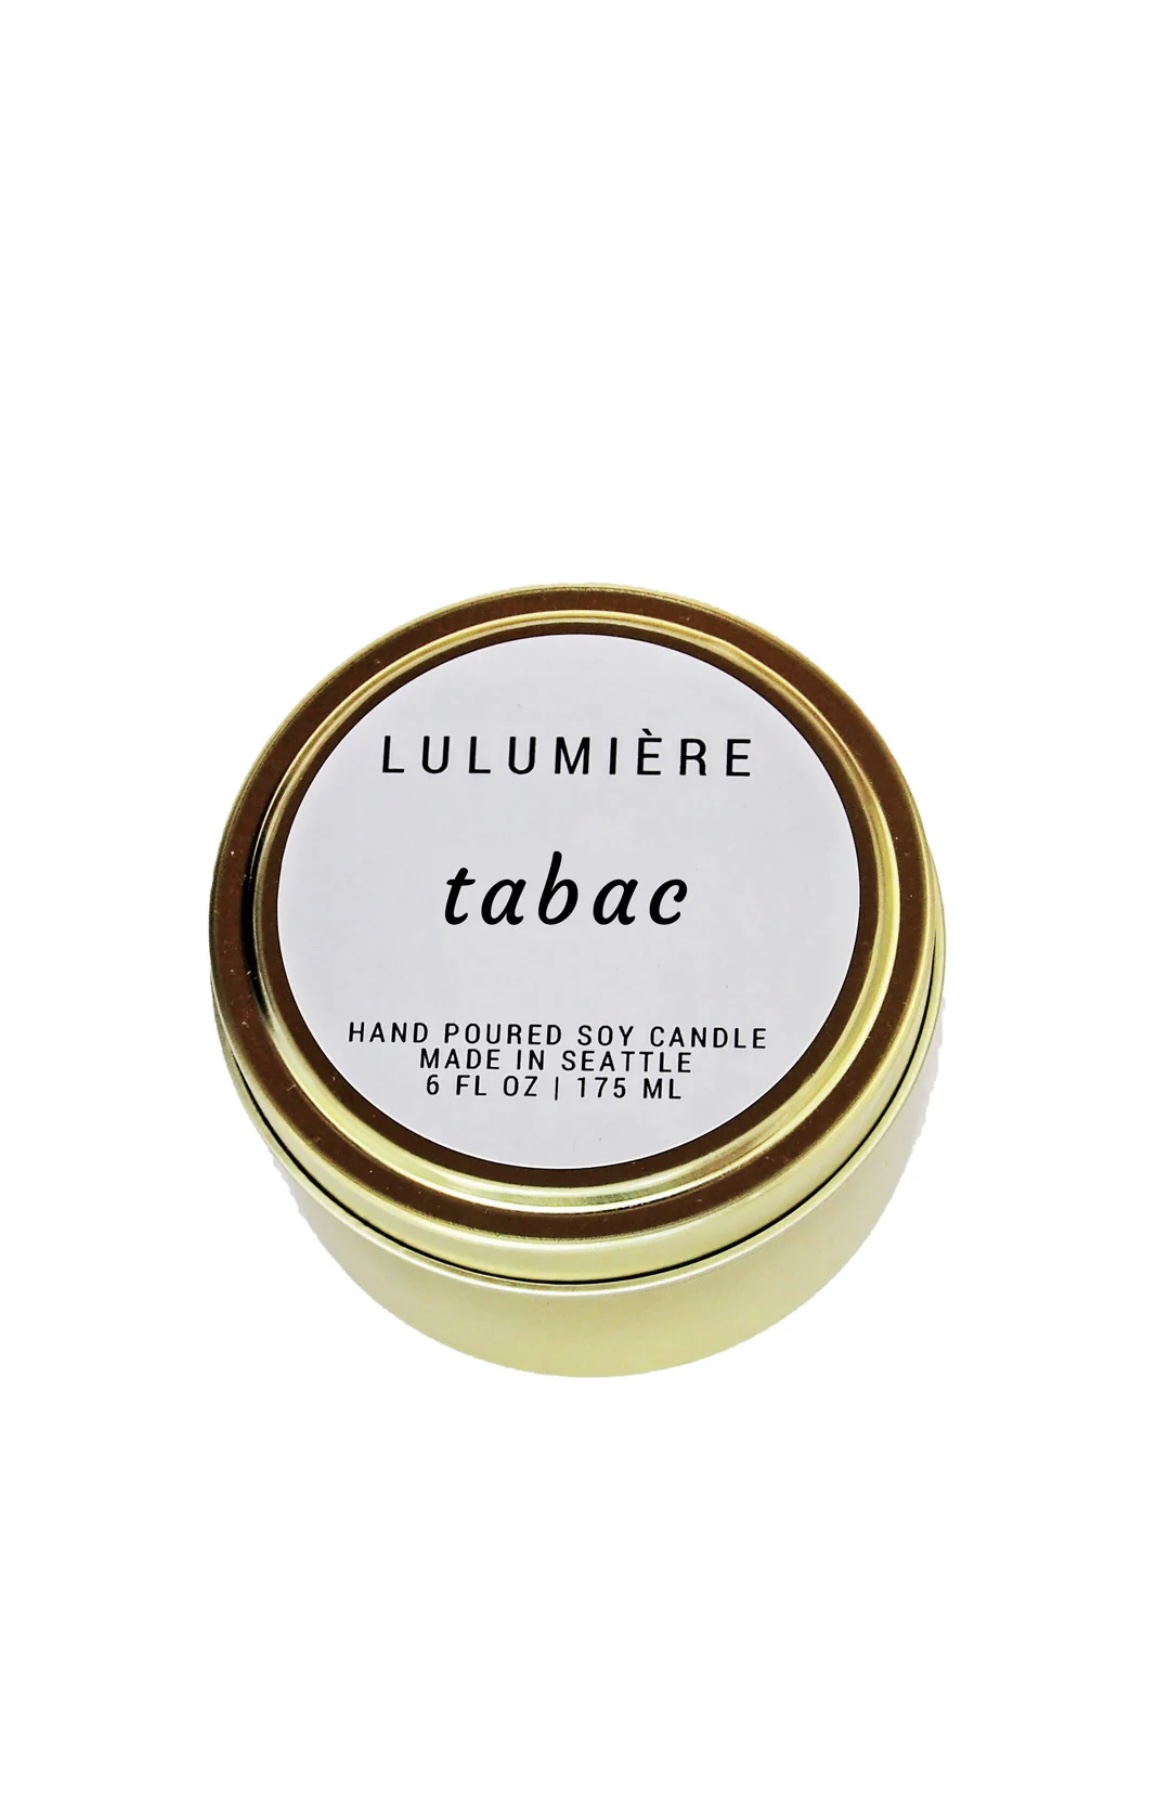 Lulumiere Tabac Soy Candle